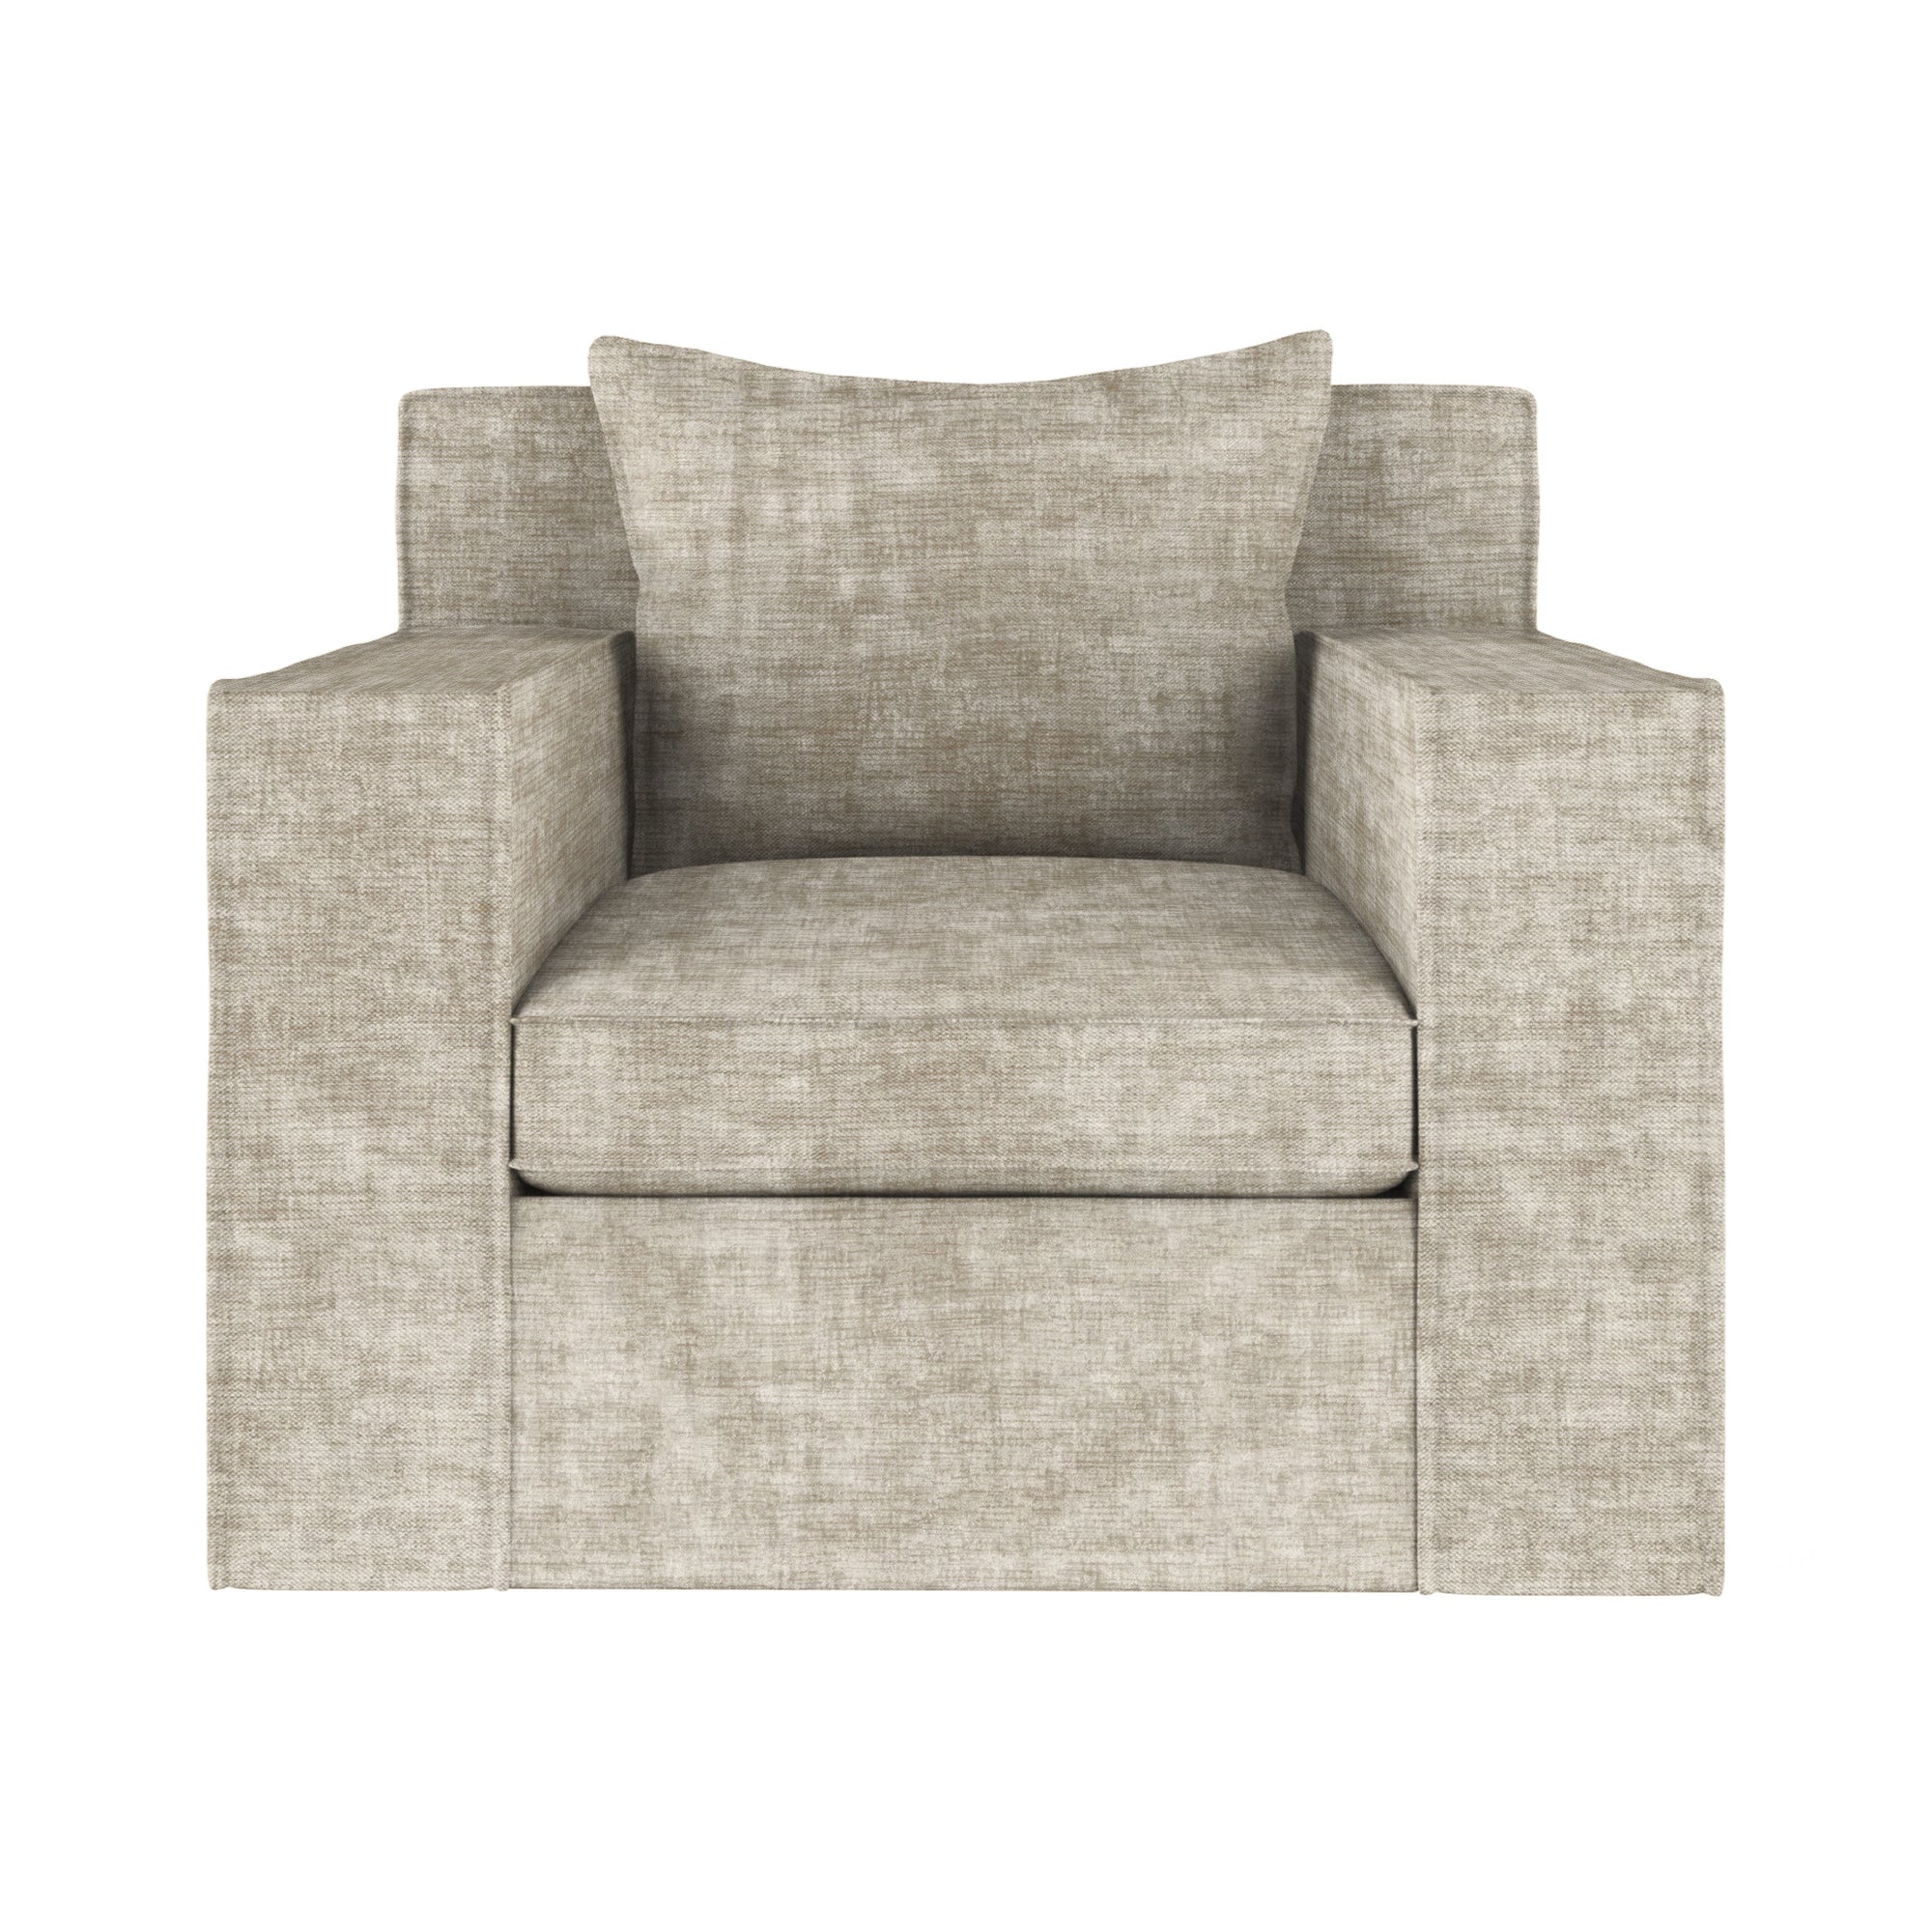 Mulberry Chair - Oyster Crushed Velvet